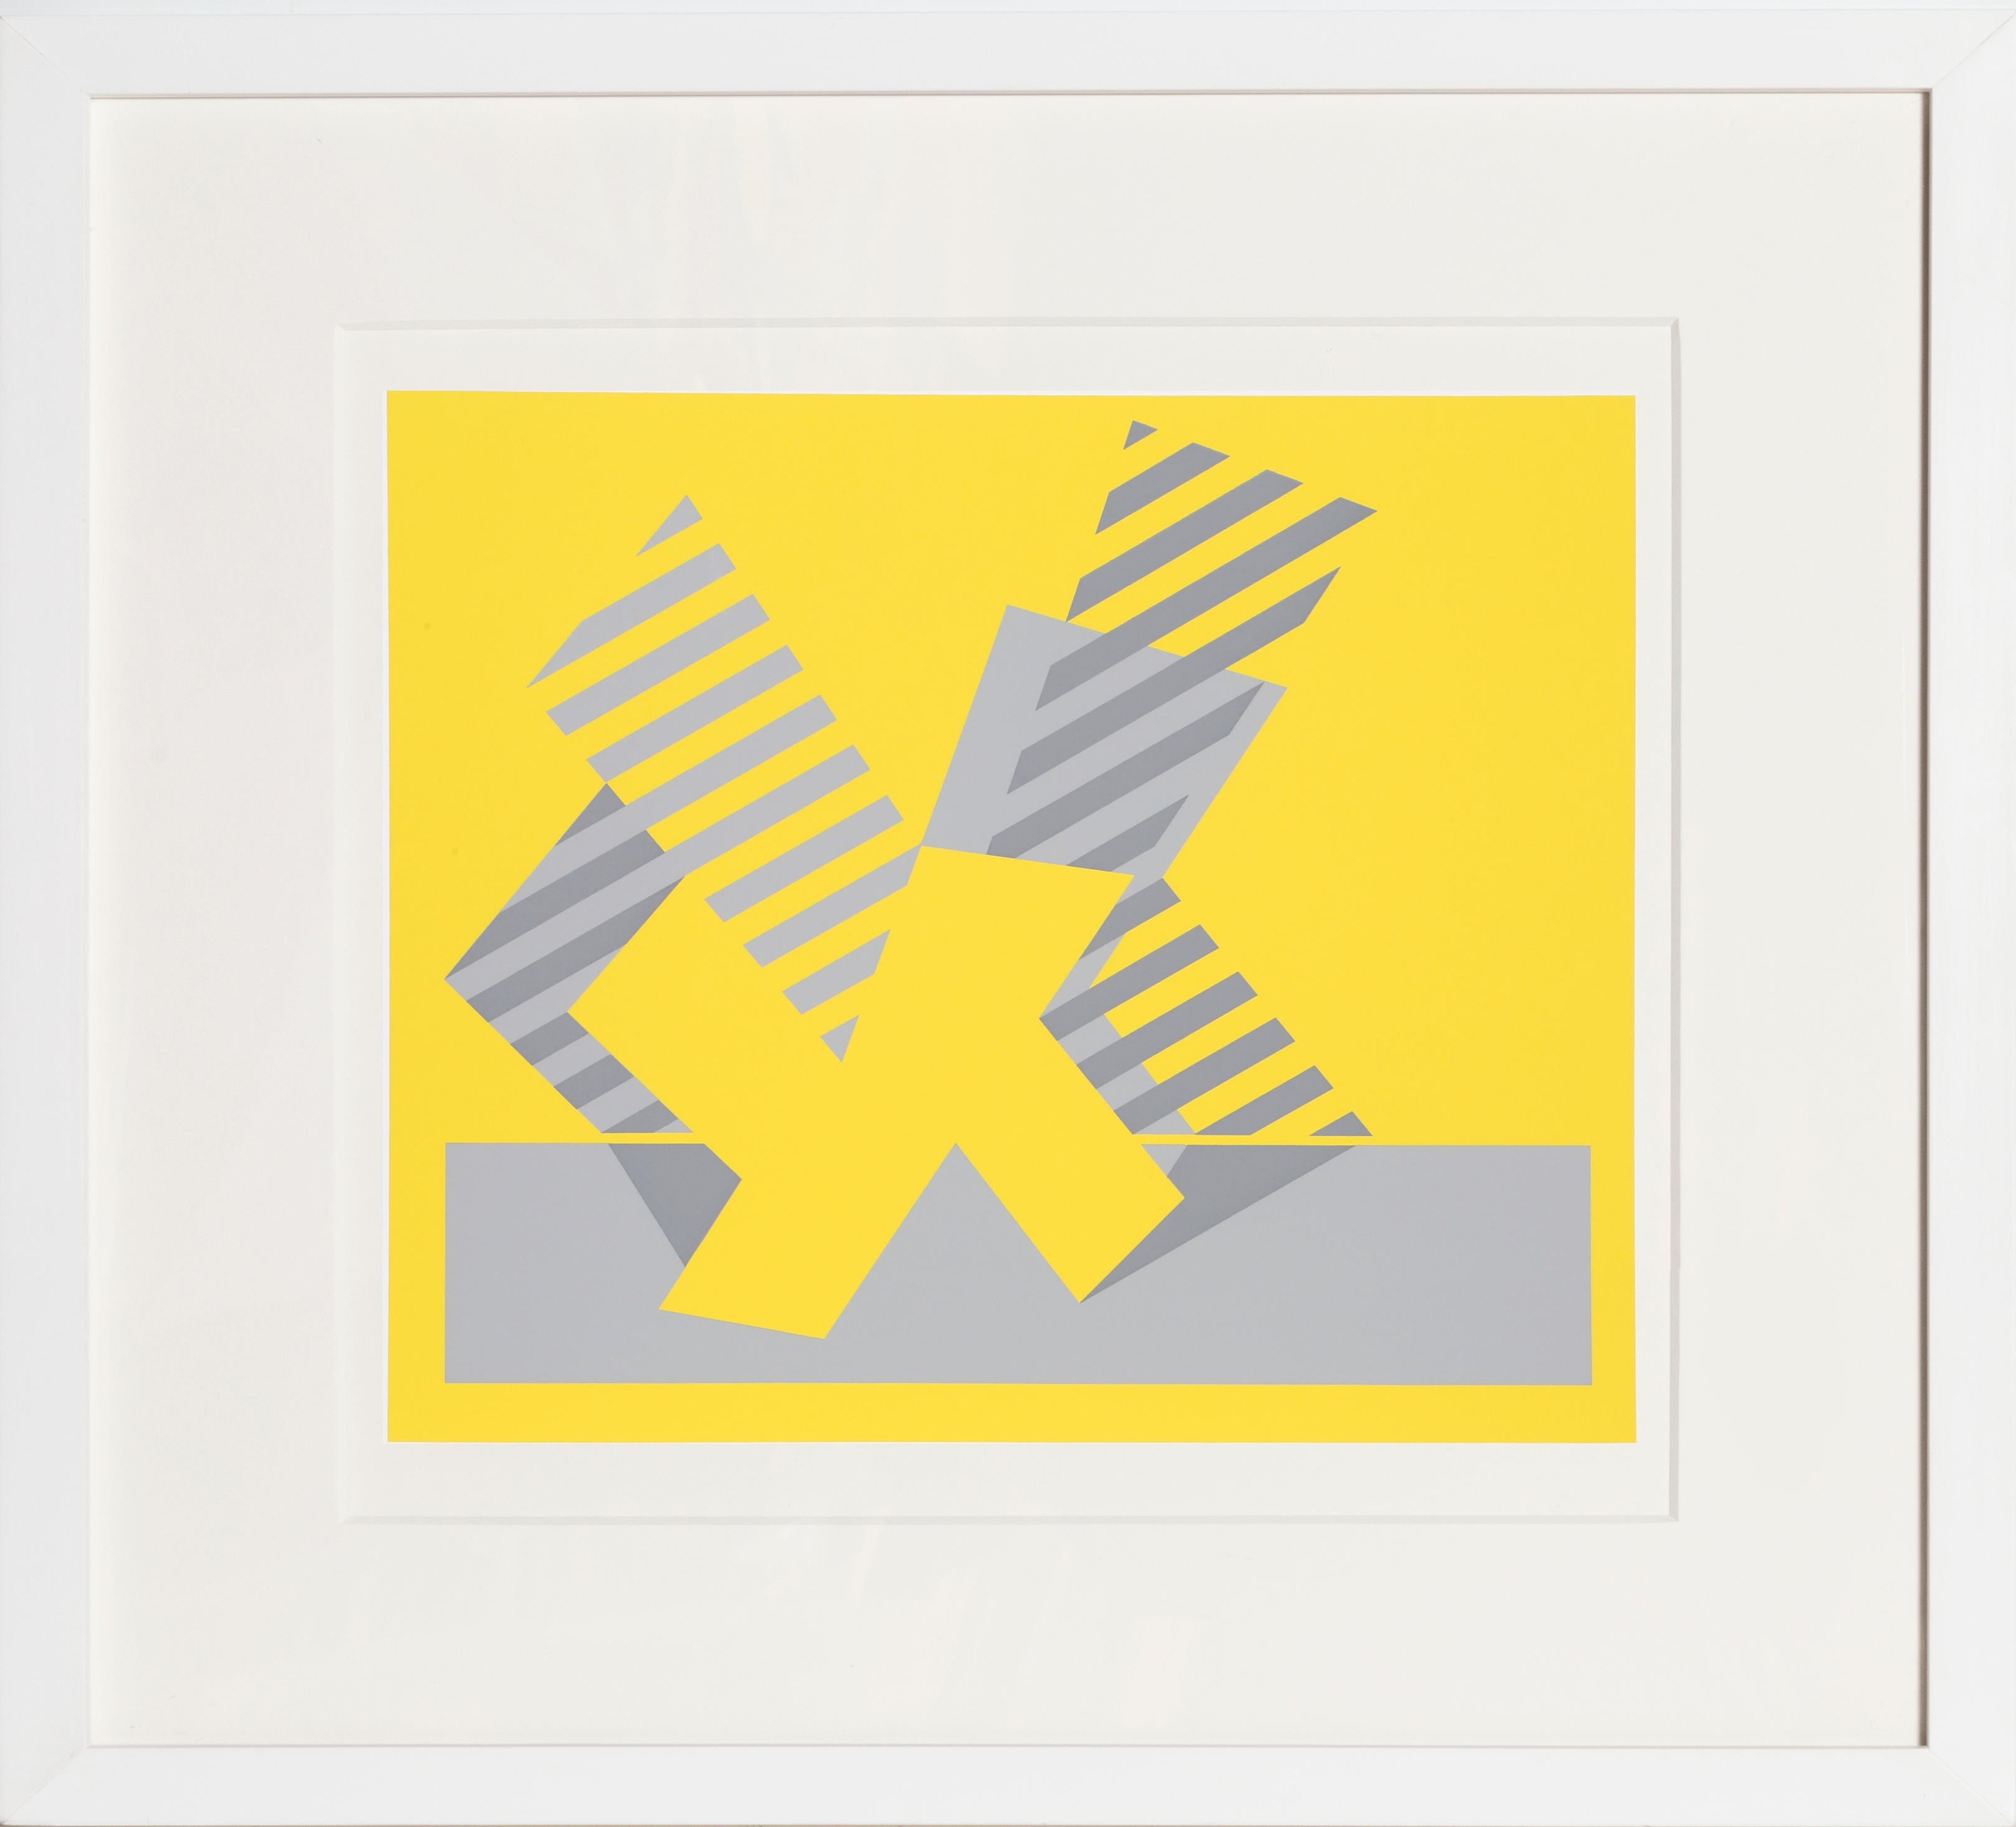 Artist: Josef Albers, German (1888 - 1976)
Title: K - P1, F4, I1
Year: 1972
Edition size: 1000
Medium: Screenprint on Mohawk Superfine Bristol paper
Image Size: 12 x 14 inches
Size: 15 x 20 in. (38.1 x 50.8 cm)
Frame Size: 22 x 24 inches
Publisher: